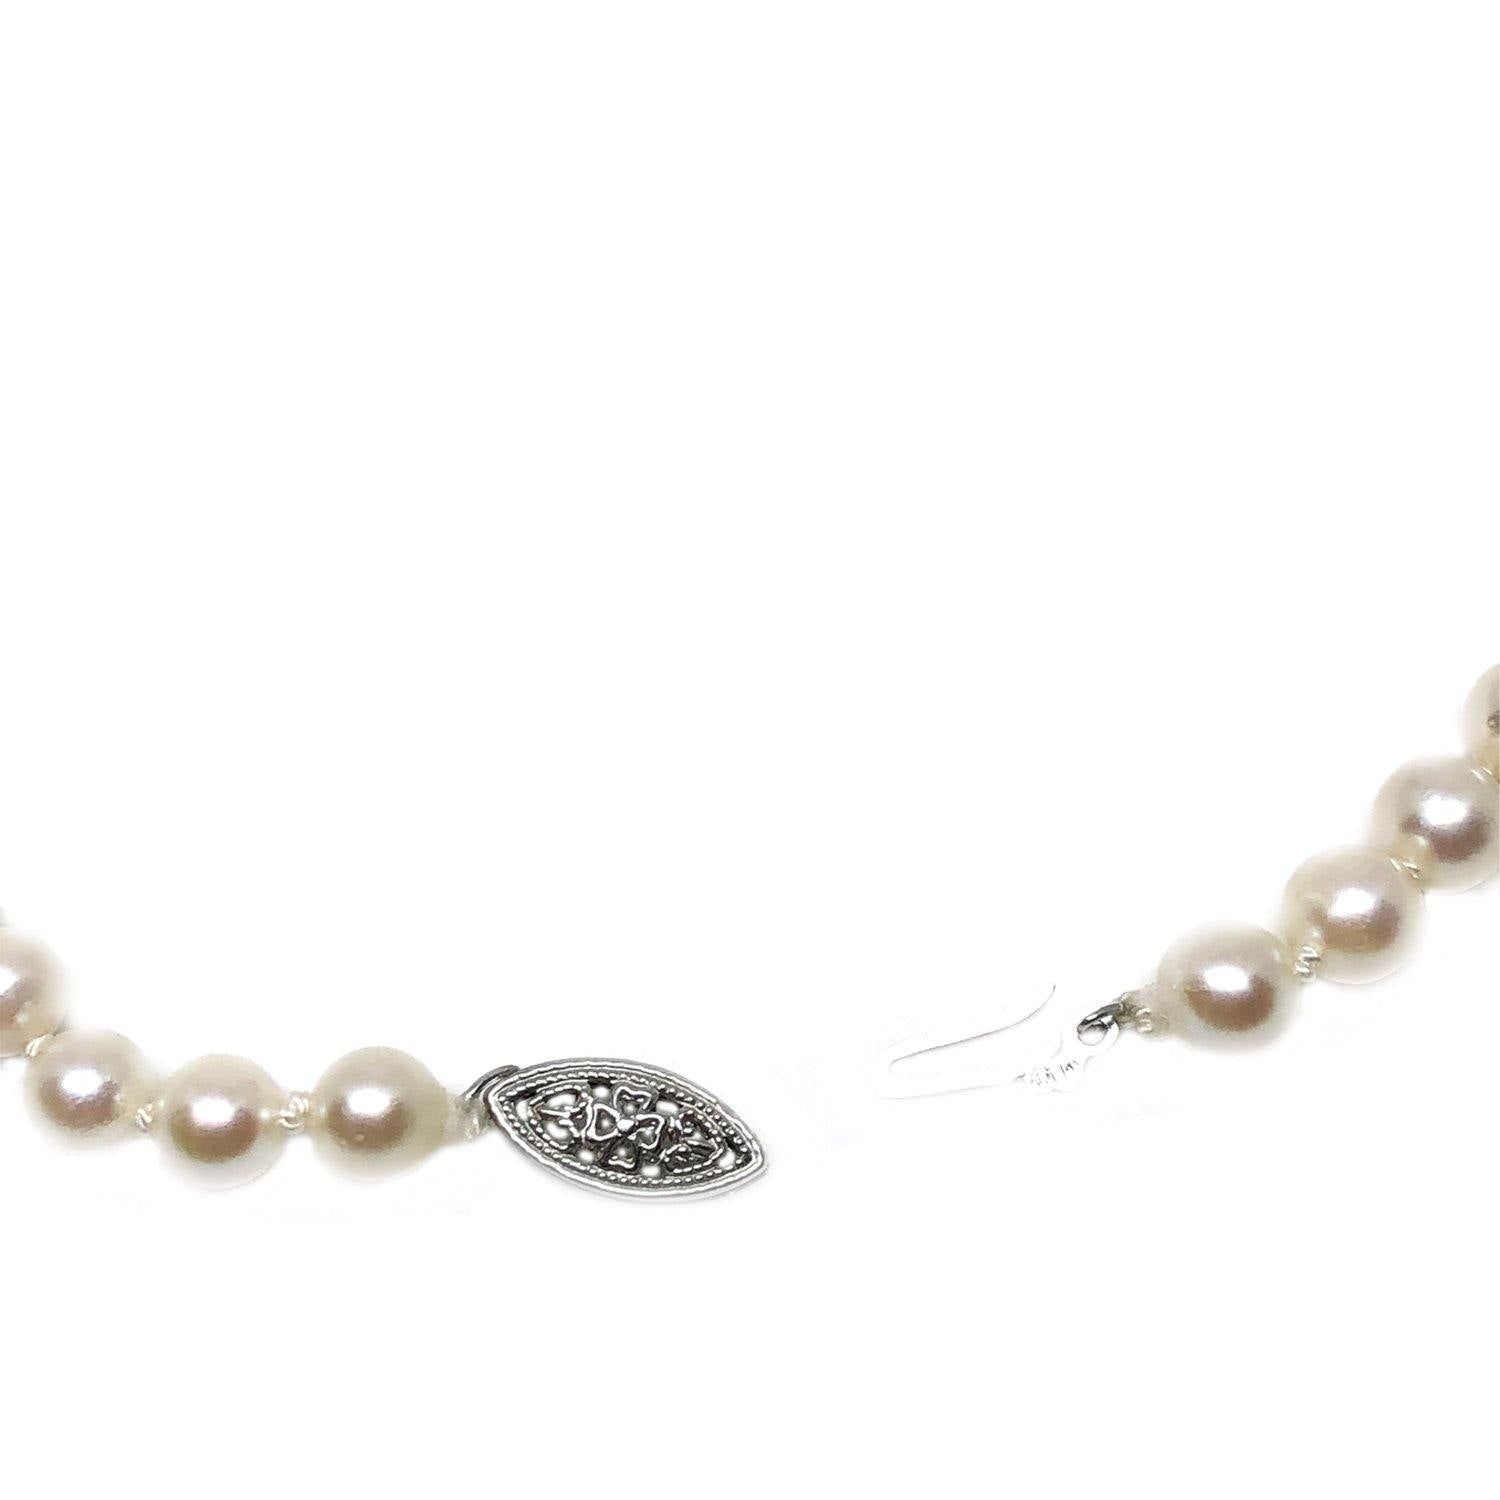 Imperial Mid Century Modern Japanese Cultured Akoya Pearl Strand - 14K White Gold 25 Inch